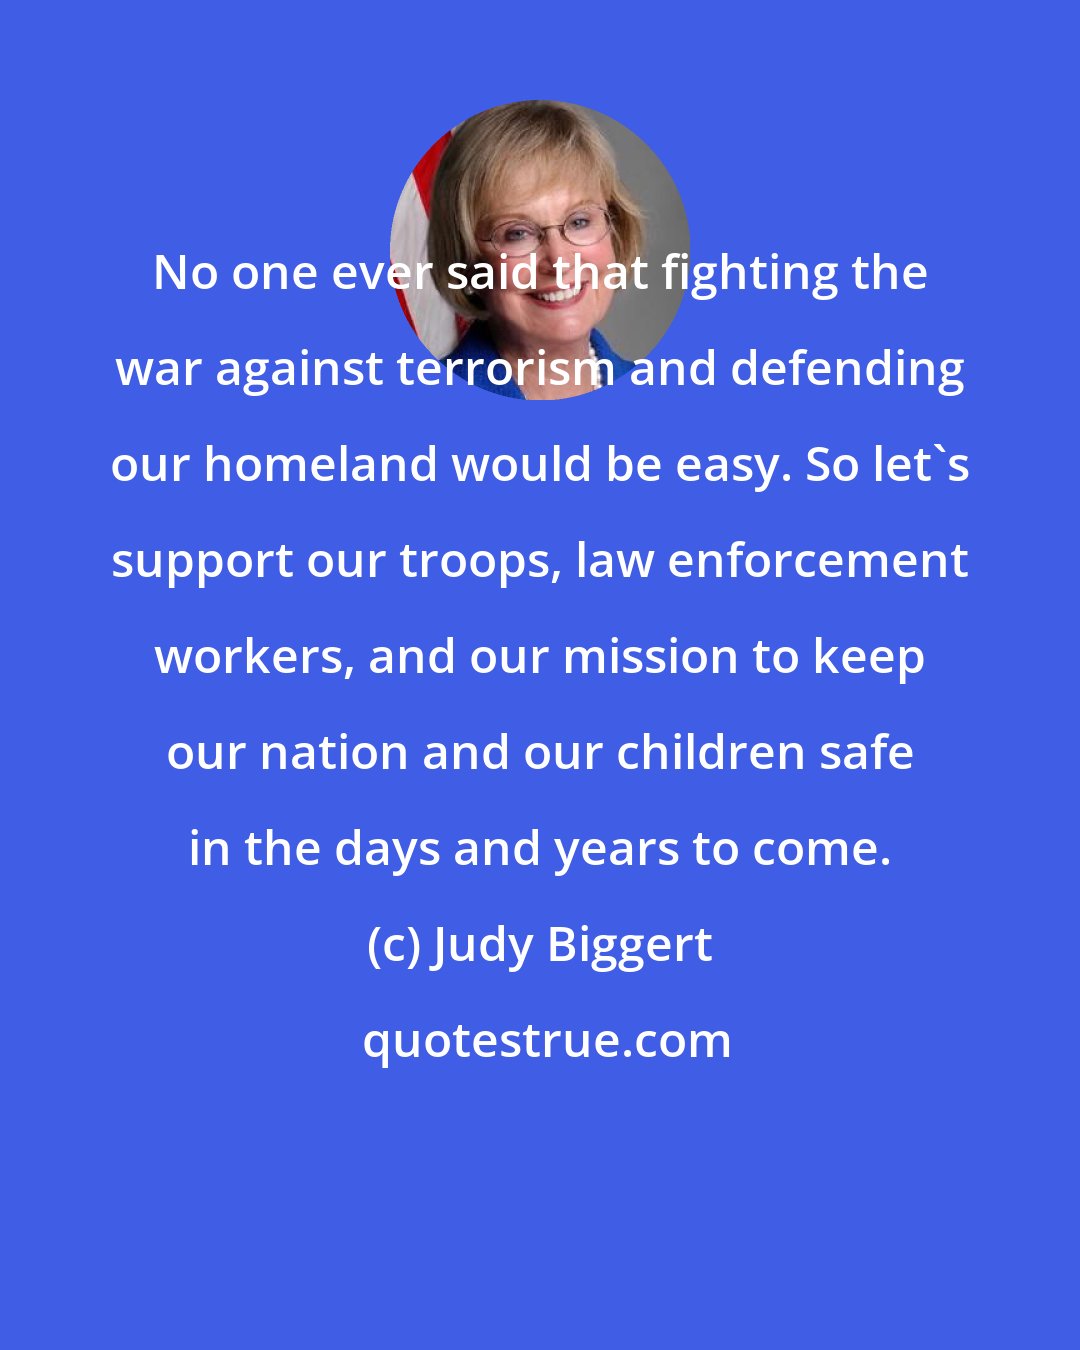 Judy Biggert: No one ever said that fighting the war against terrorism and defending our homeland would be easy. So let's support our troops, law enforcement workers, and our mission to keep our nation and our children safe in the days and years to come.